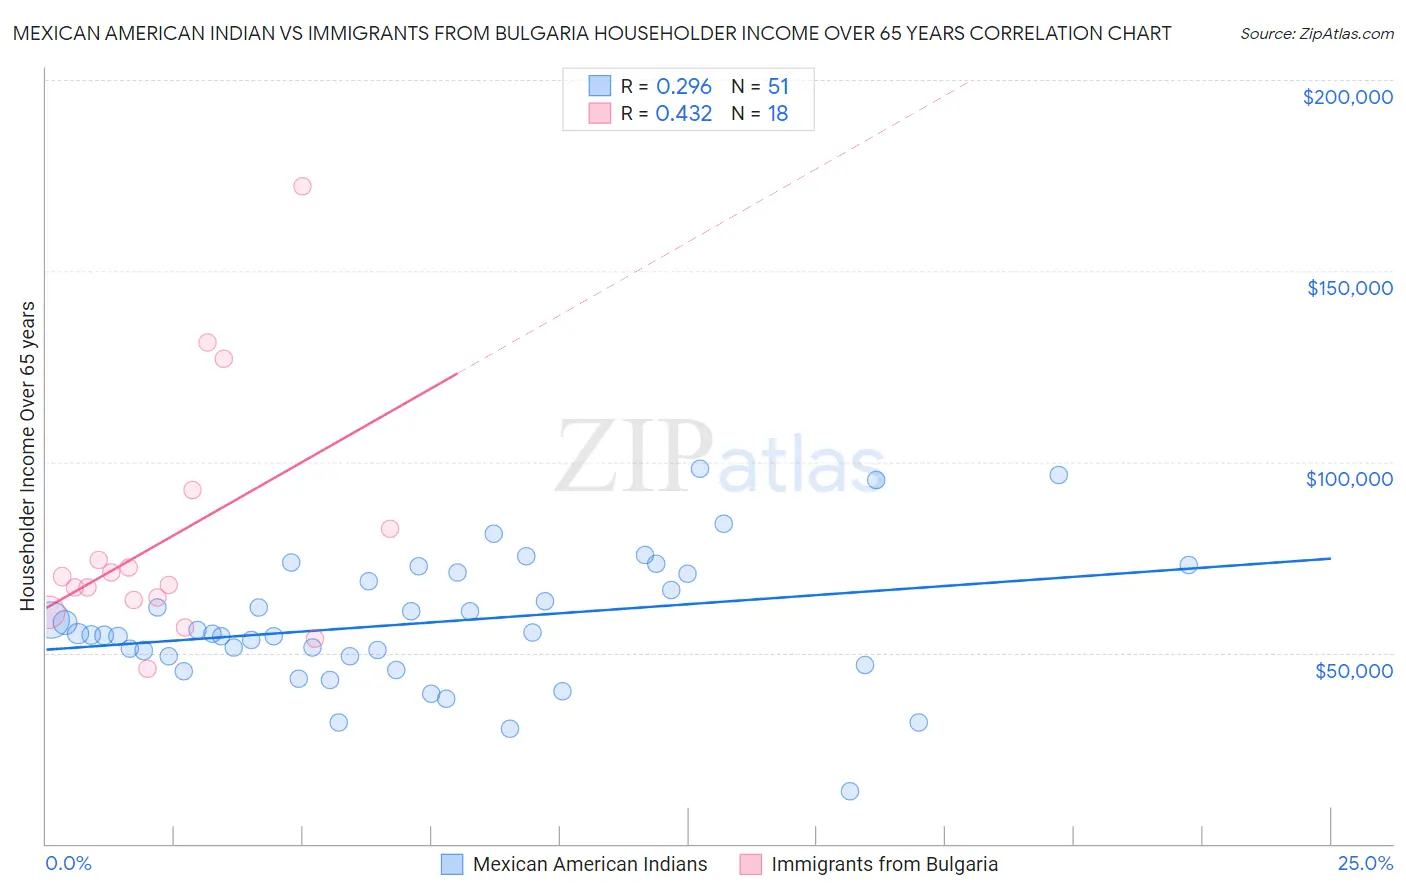 Mexican American Indian vs Immigrants from Bulgaria Householder Income Over 65 years